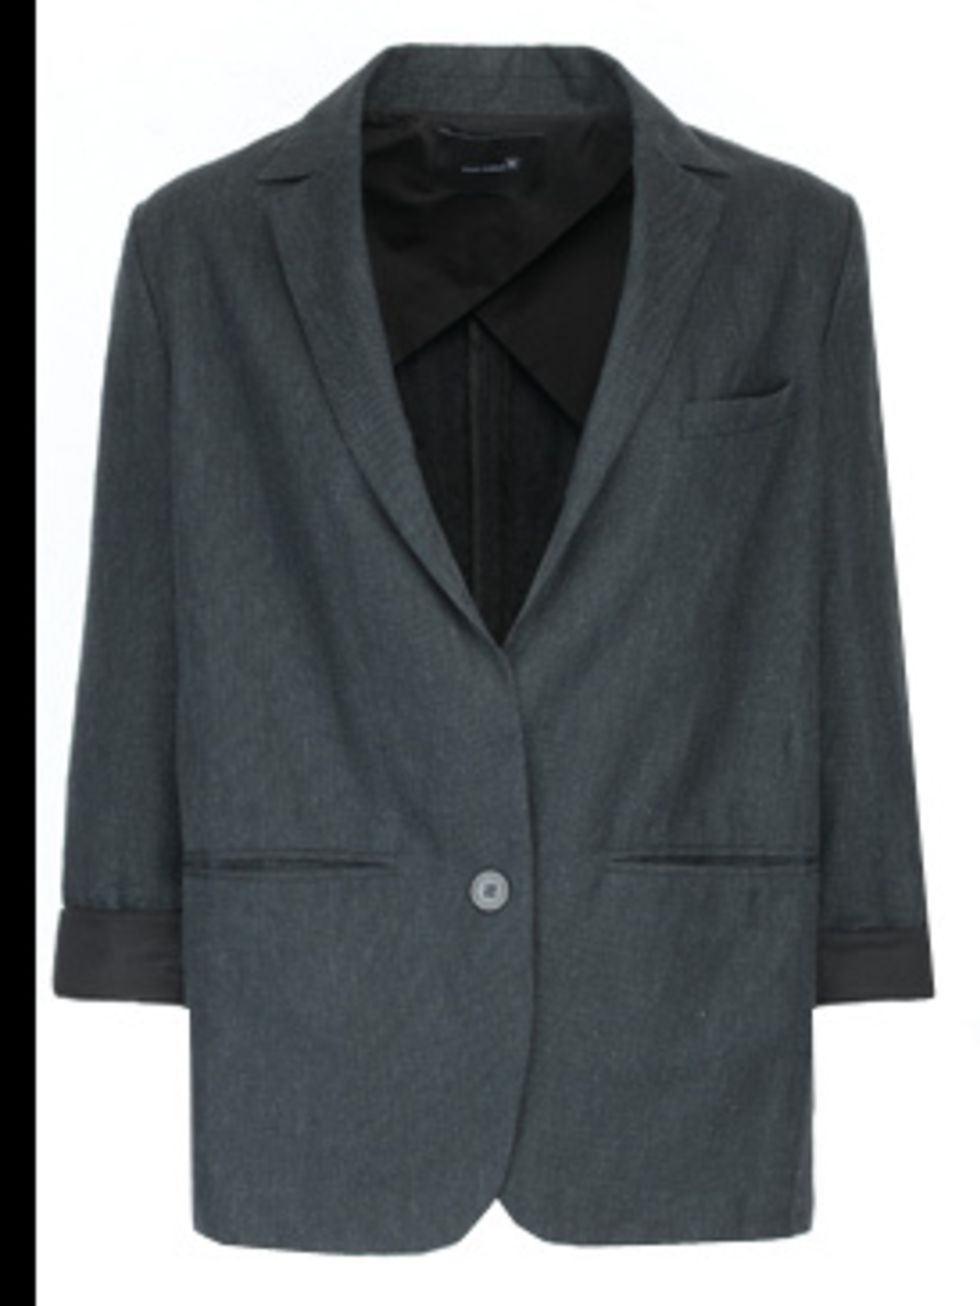 <p>Blazers will be a fixture in your wardrobe already so enjoy them again this season and update your collection for summer with a loose linen style that evokes eighties glamour.</p><p>Blazer, £357.00 by Isabel Marant. For stockists call Selfridges on 080